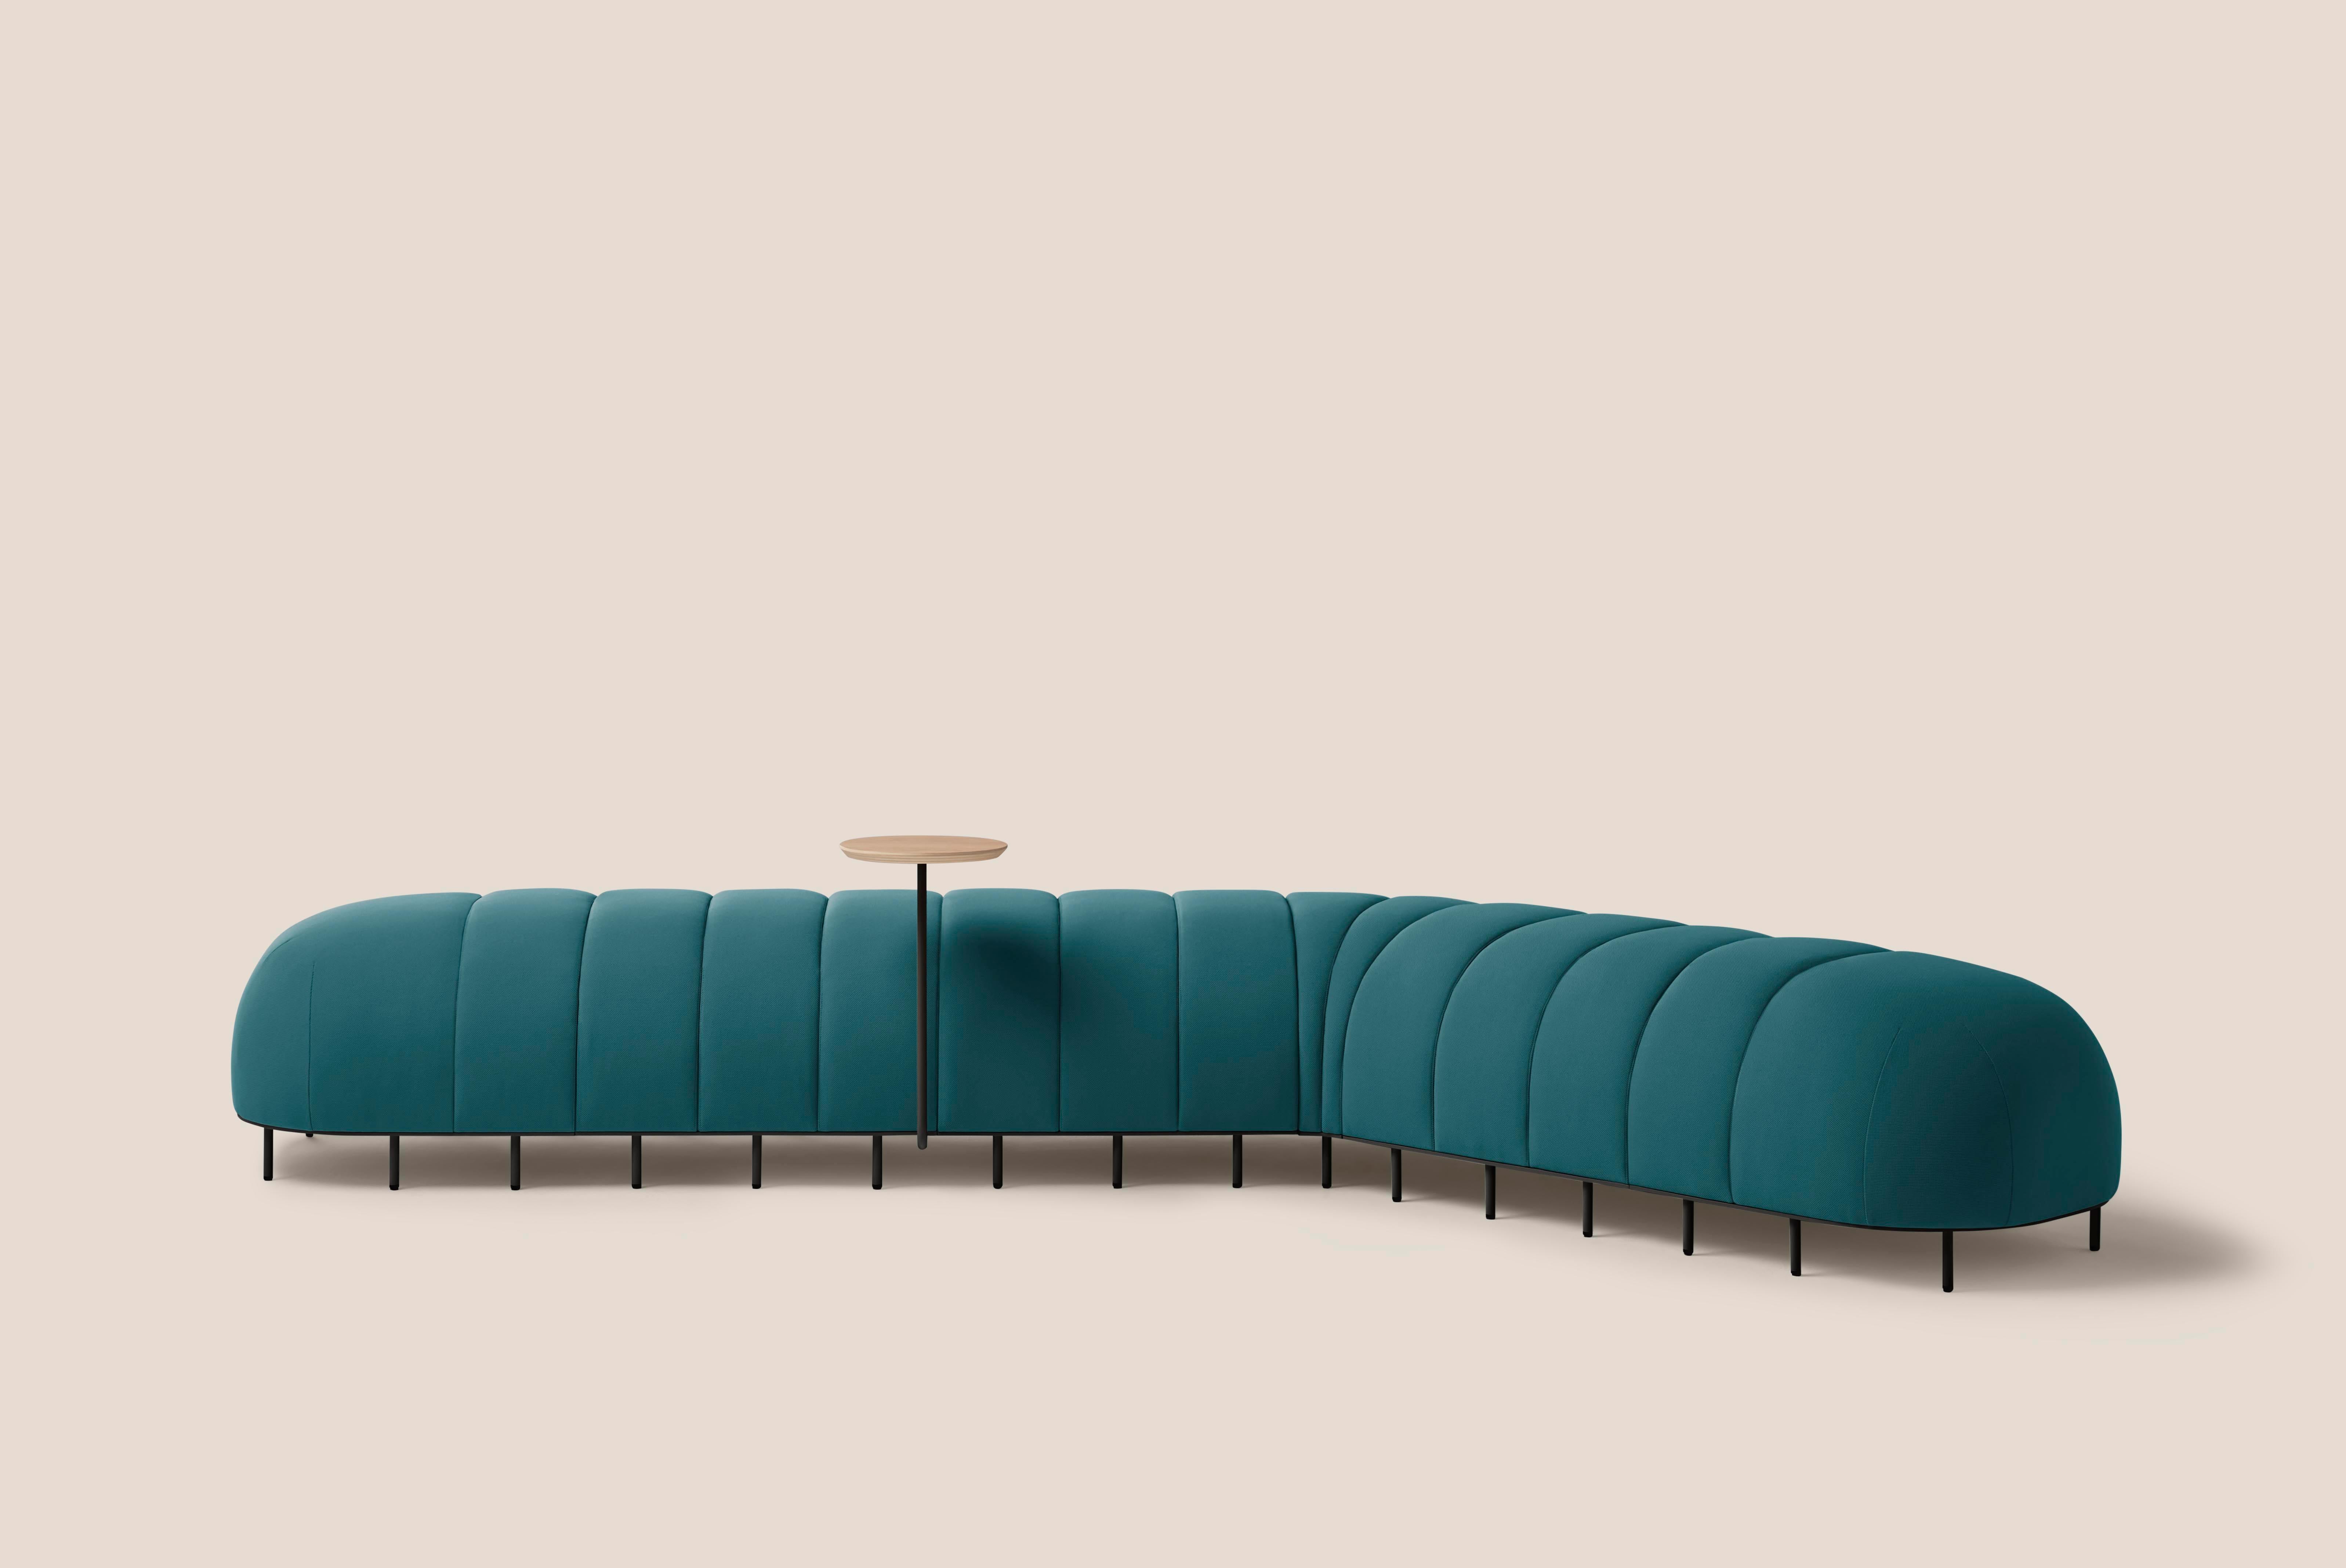 Blue worm bench V by Pepe Albargues
Dimensions: D 65 x W 280 x H 50 cm
Materials: Plywood, foam CMHR, iron
Available in different colors. Custom modules convinations available

1 x Curved module
3 x Straight module
2 x End module
1 x Side